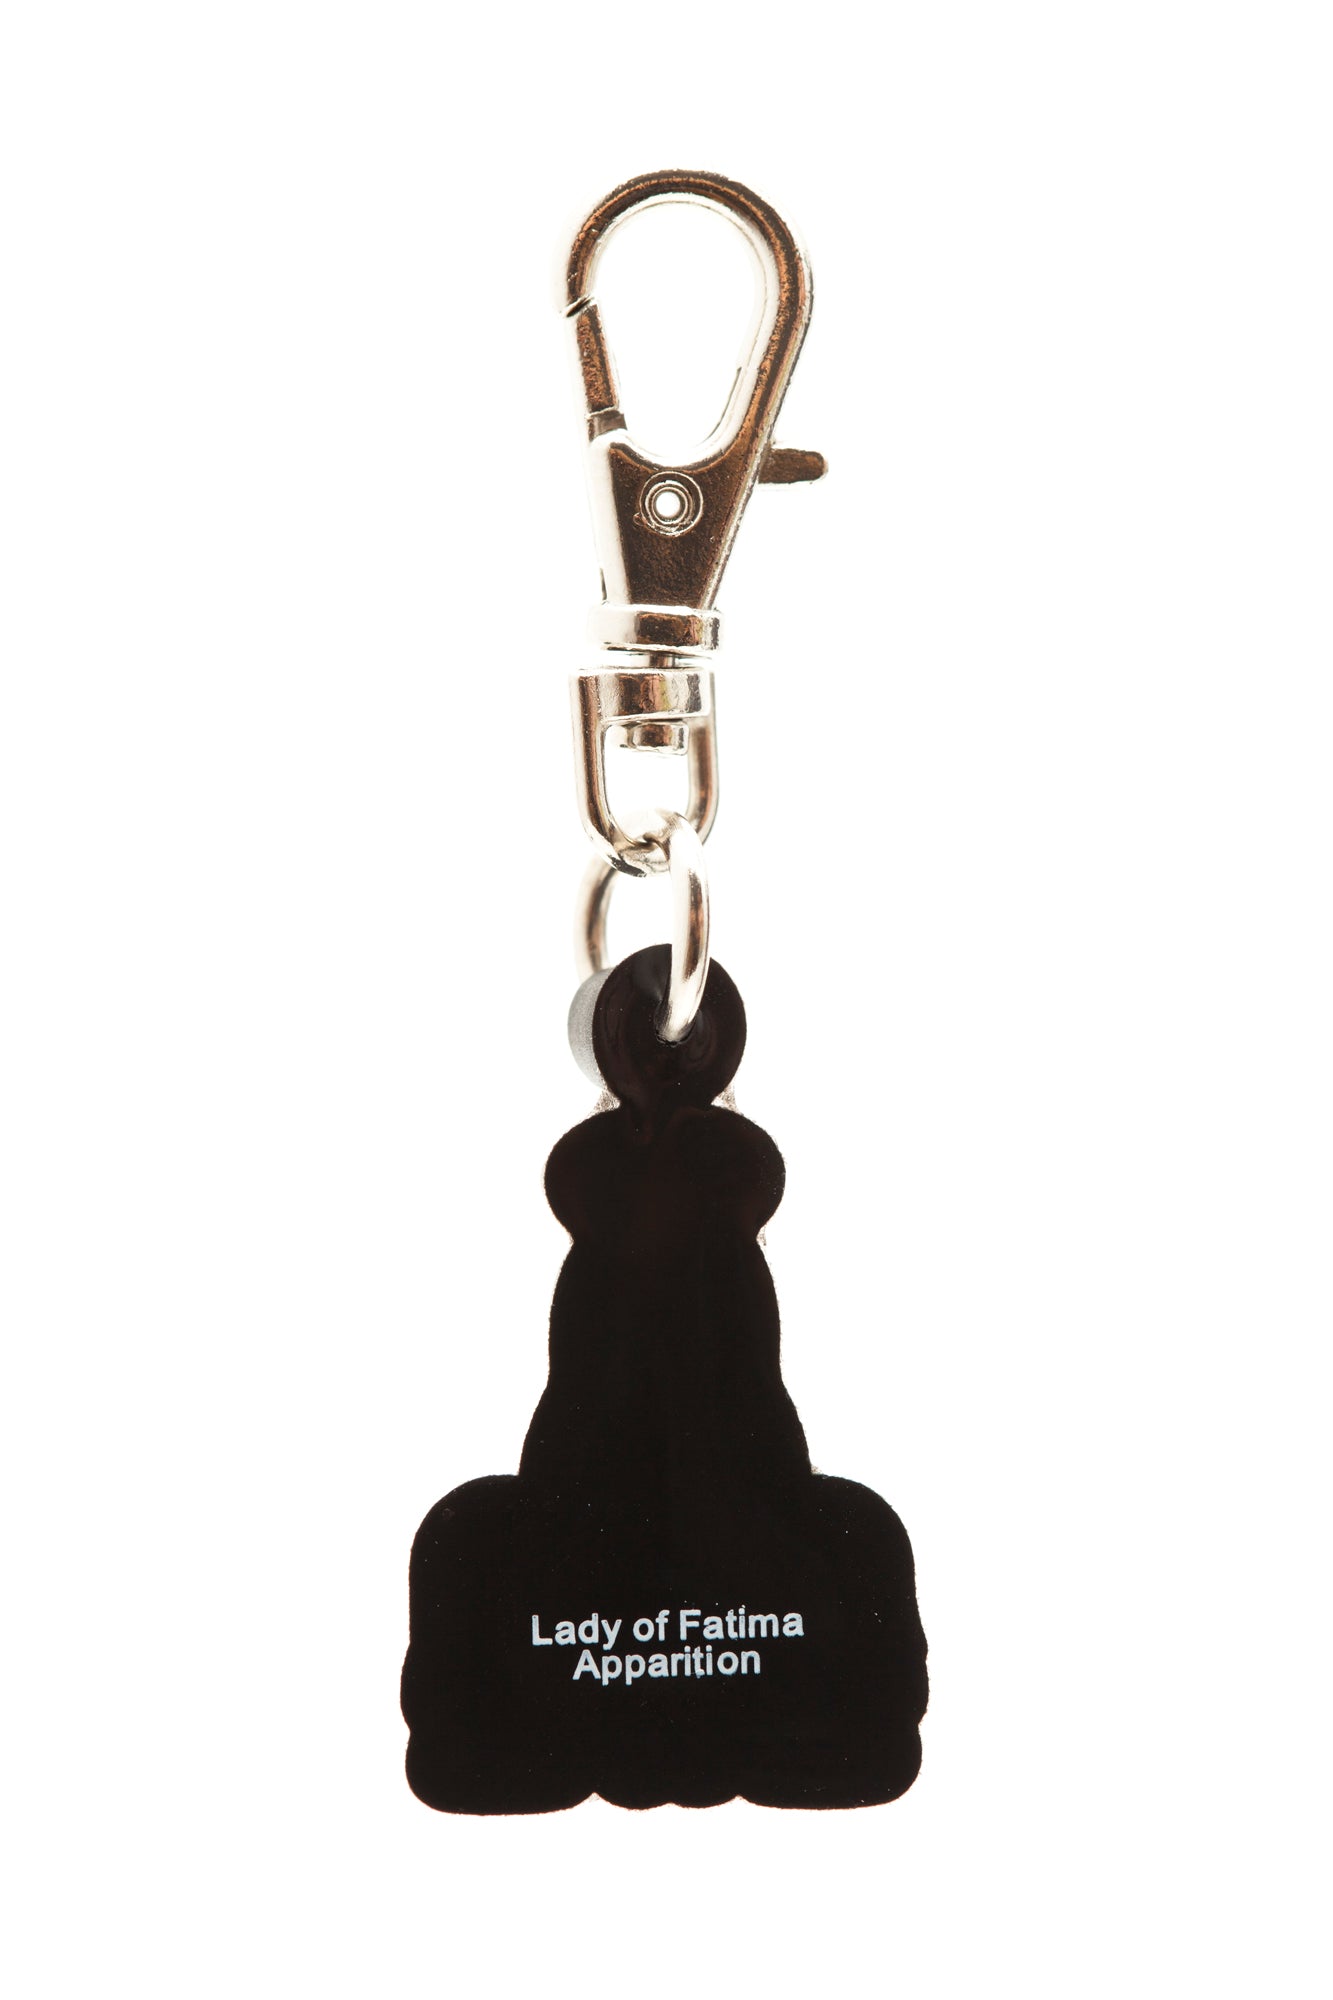 Our Lady of Fatima Children charm